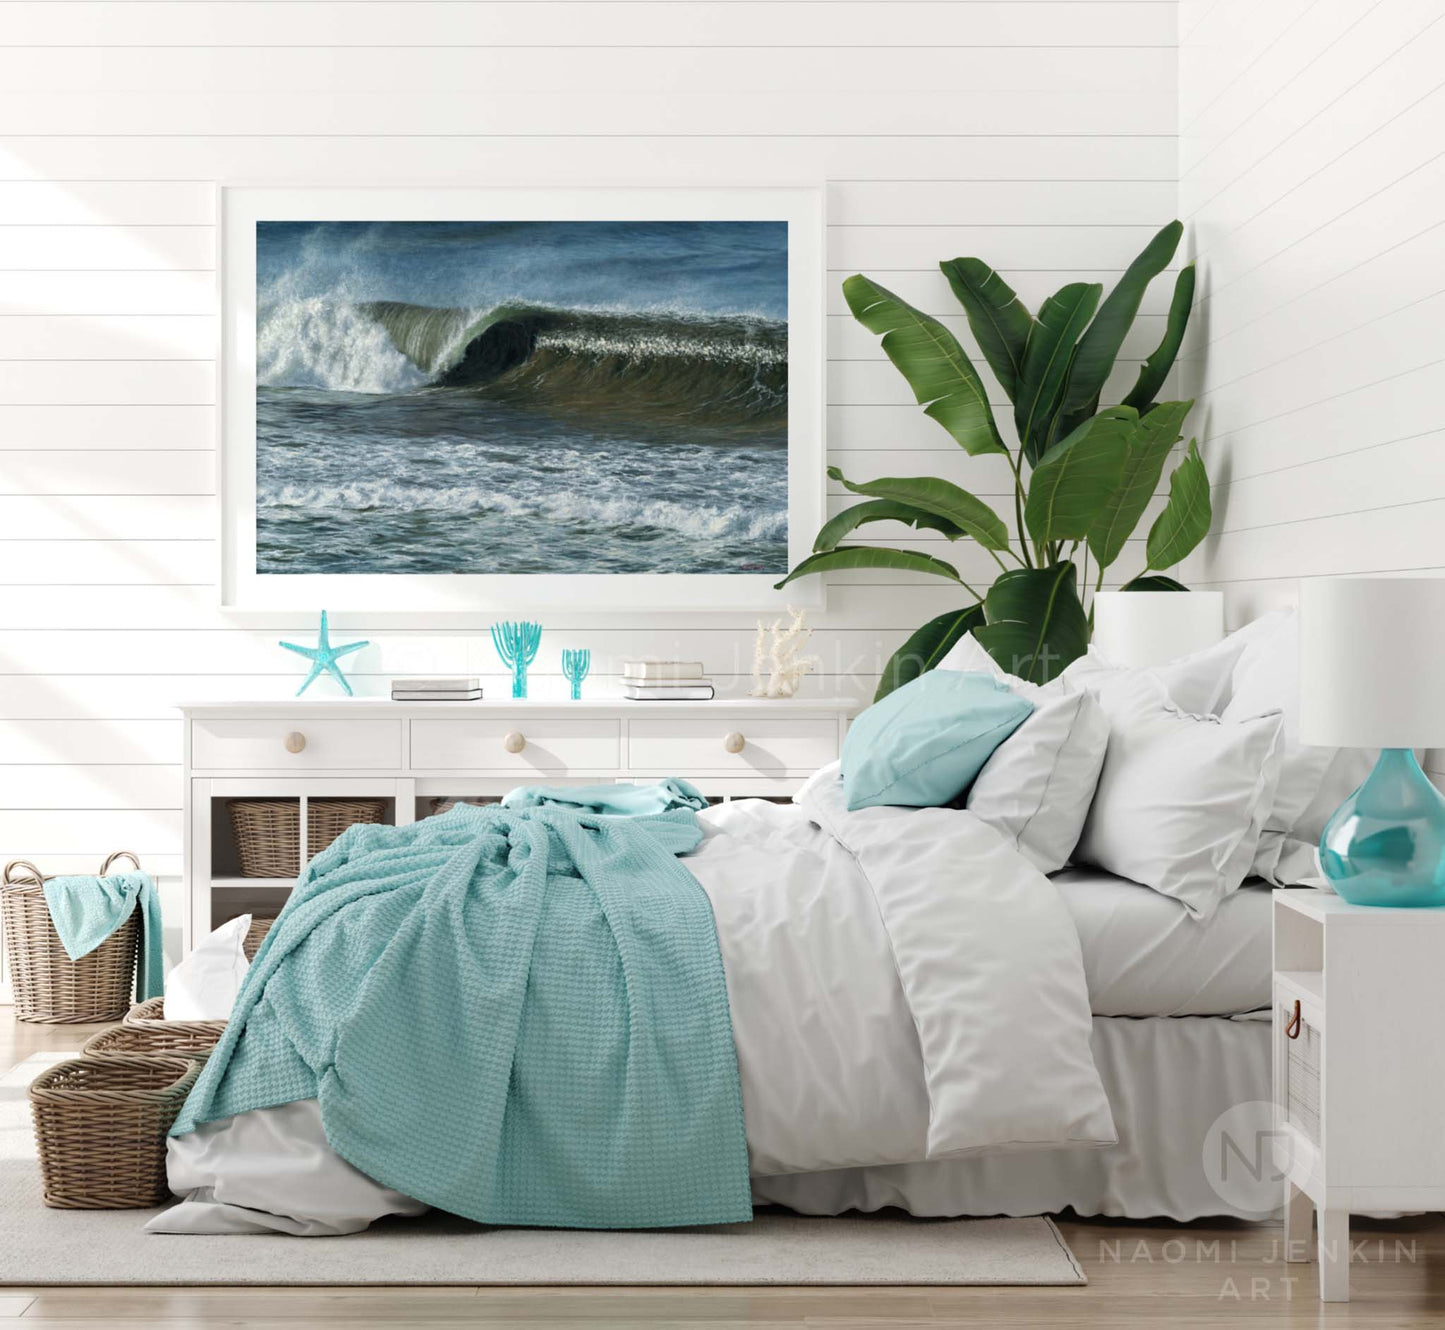 Framed wave print 'A Perfect Tube' in a bedroom setting by seascape artist Naomi Jenkin Art